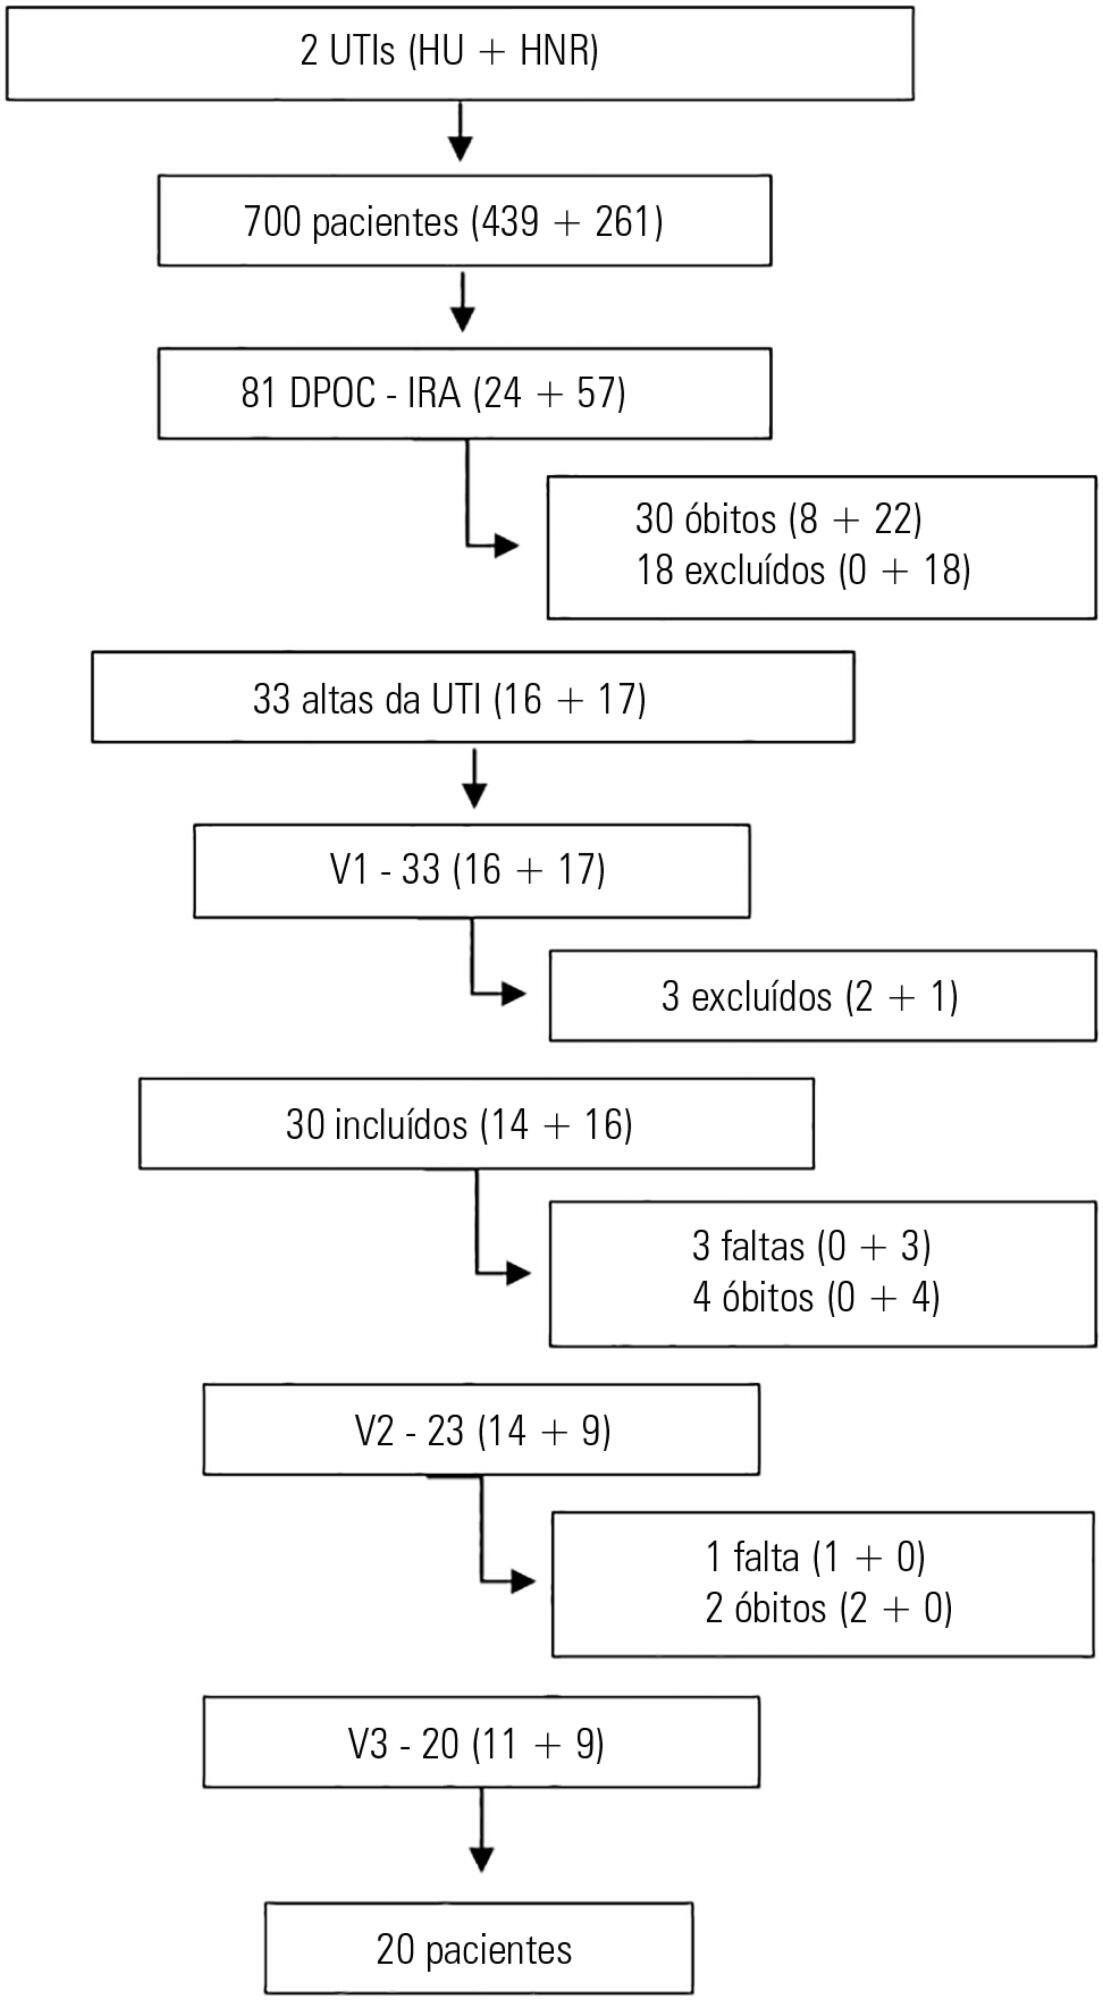 Chronic obstructive pulmonary disease exacerbation in the intensive care unit: clinical, functional and quality of life at discharge and 3 months of follow up